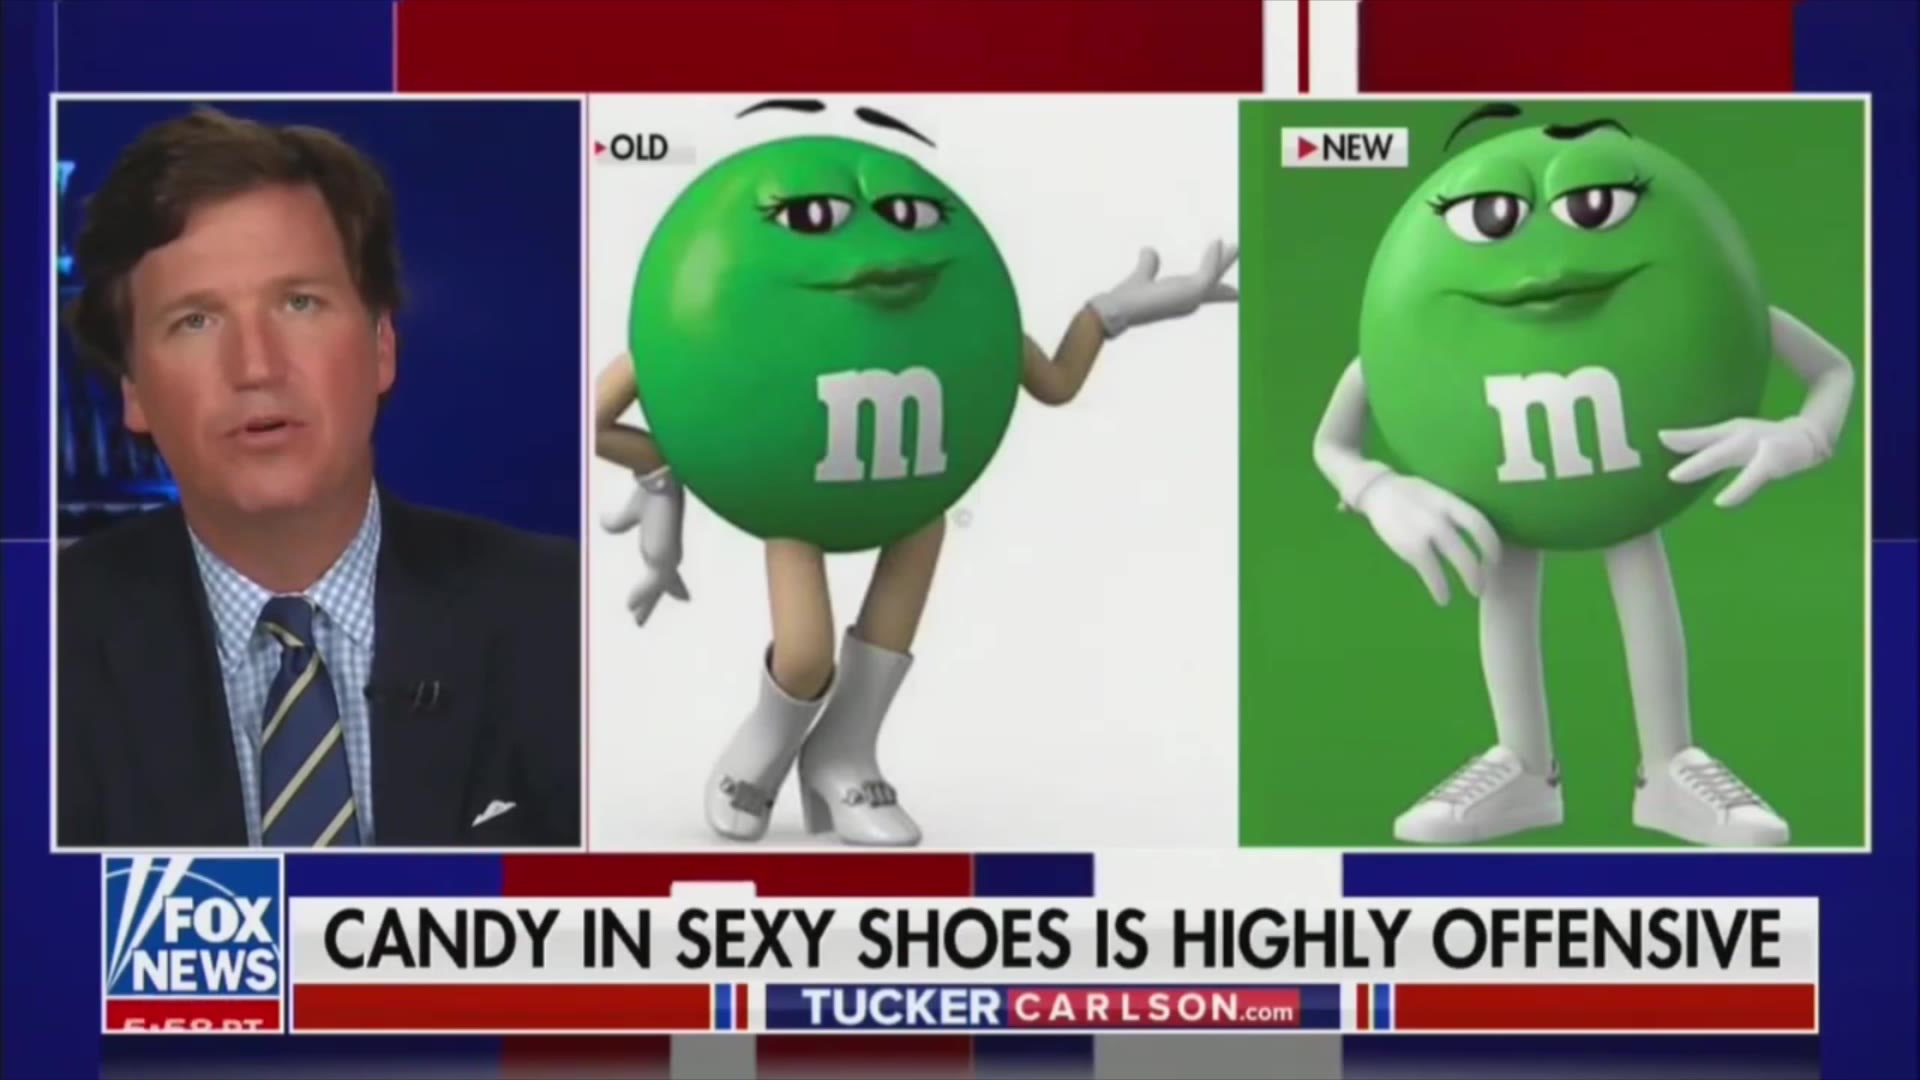 Gender Questions Are Not New for M&M's Mascots